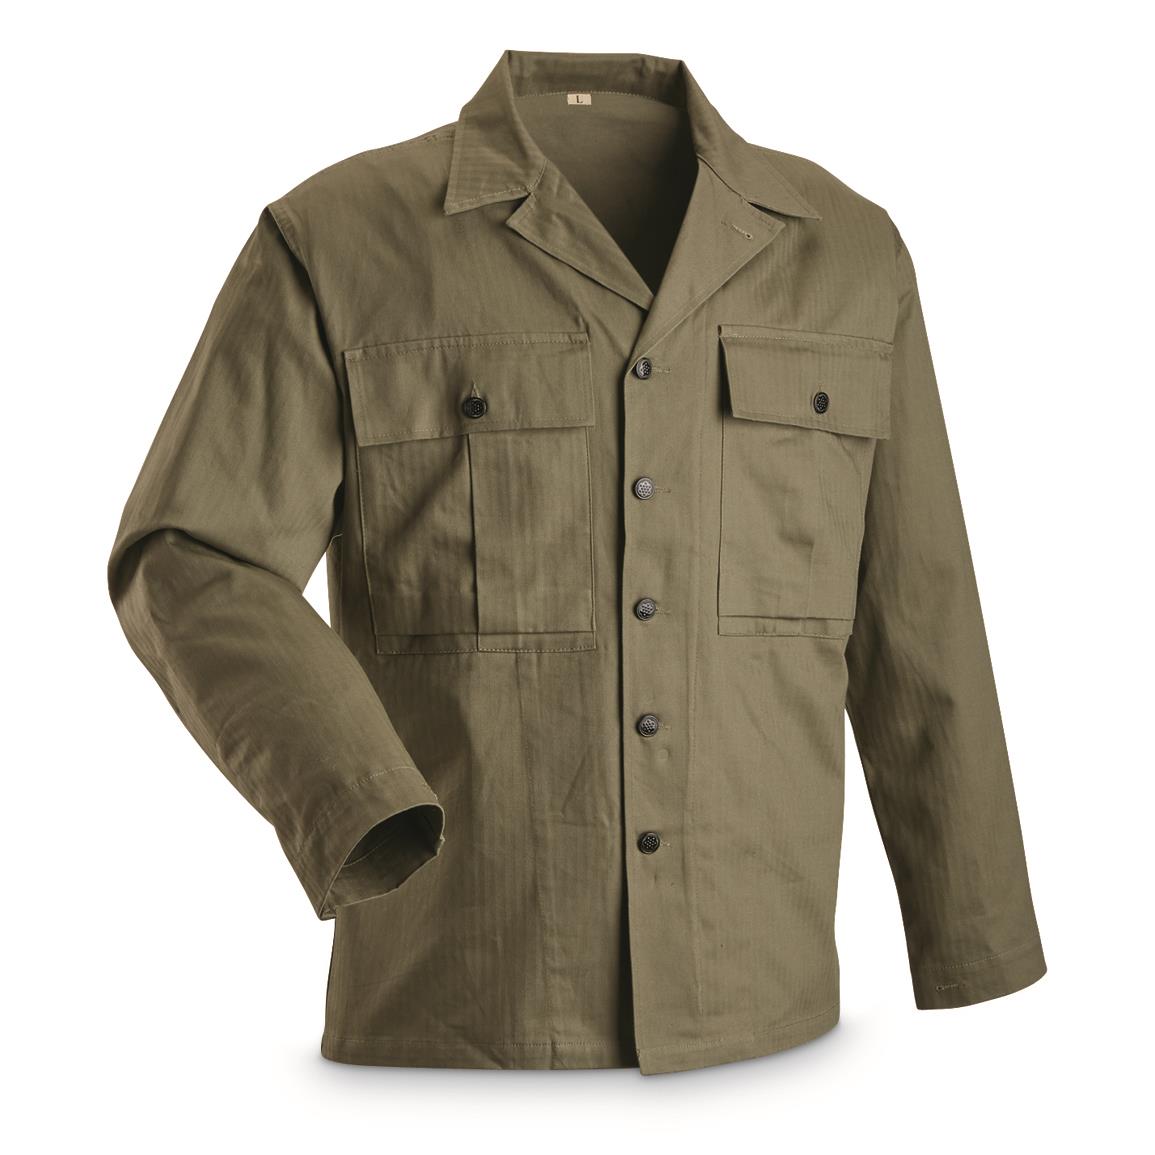 U.S. Military WWII HBT Jacket, Reproduction - 75921, Reproduction ...